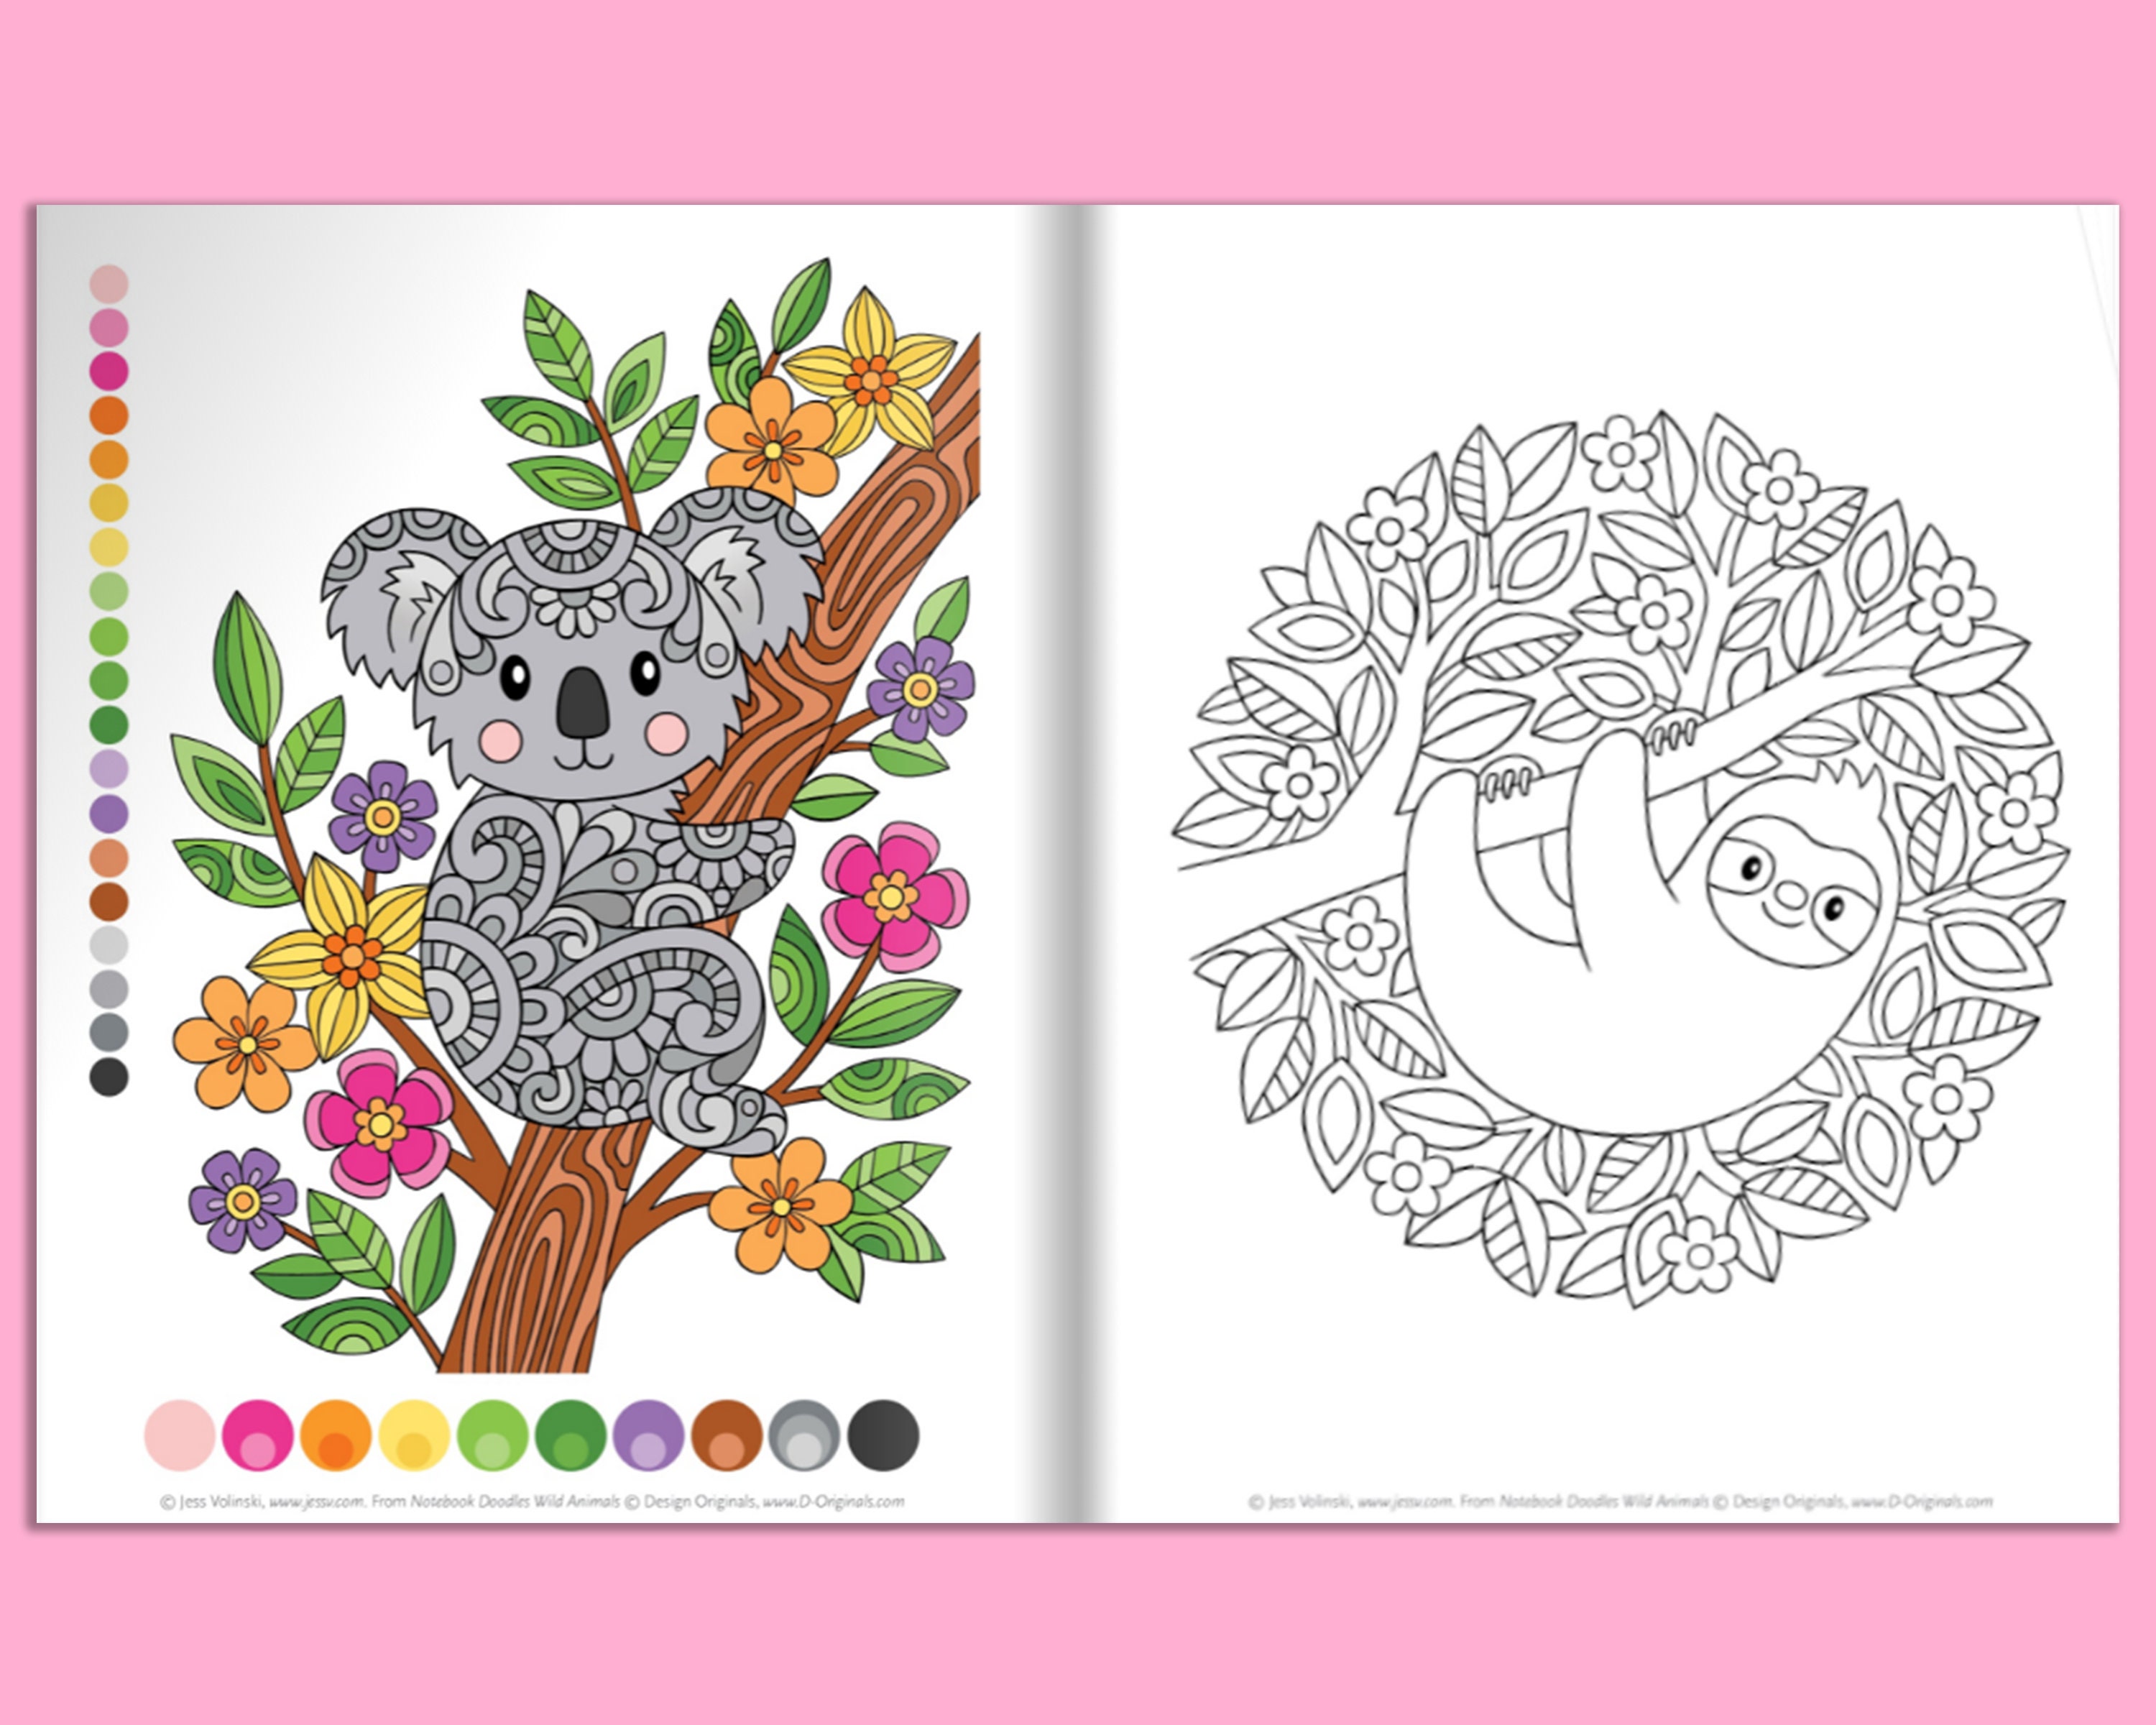 Coloring Books, Animal & Doodle Illustrations –